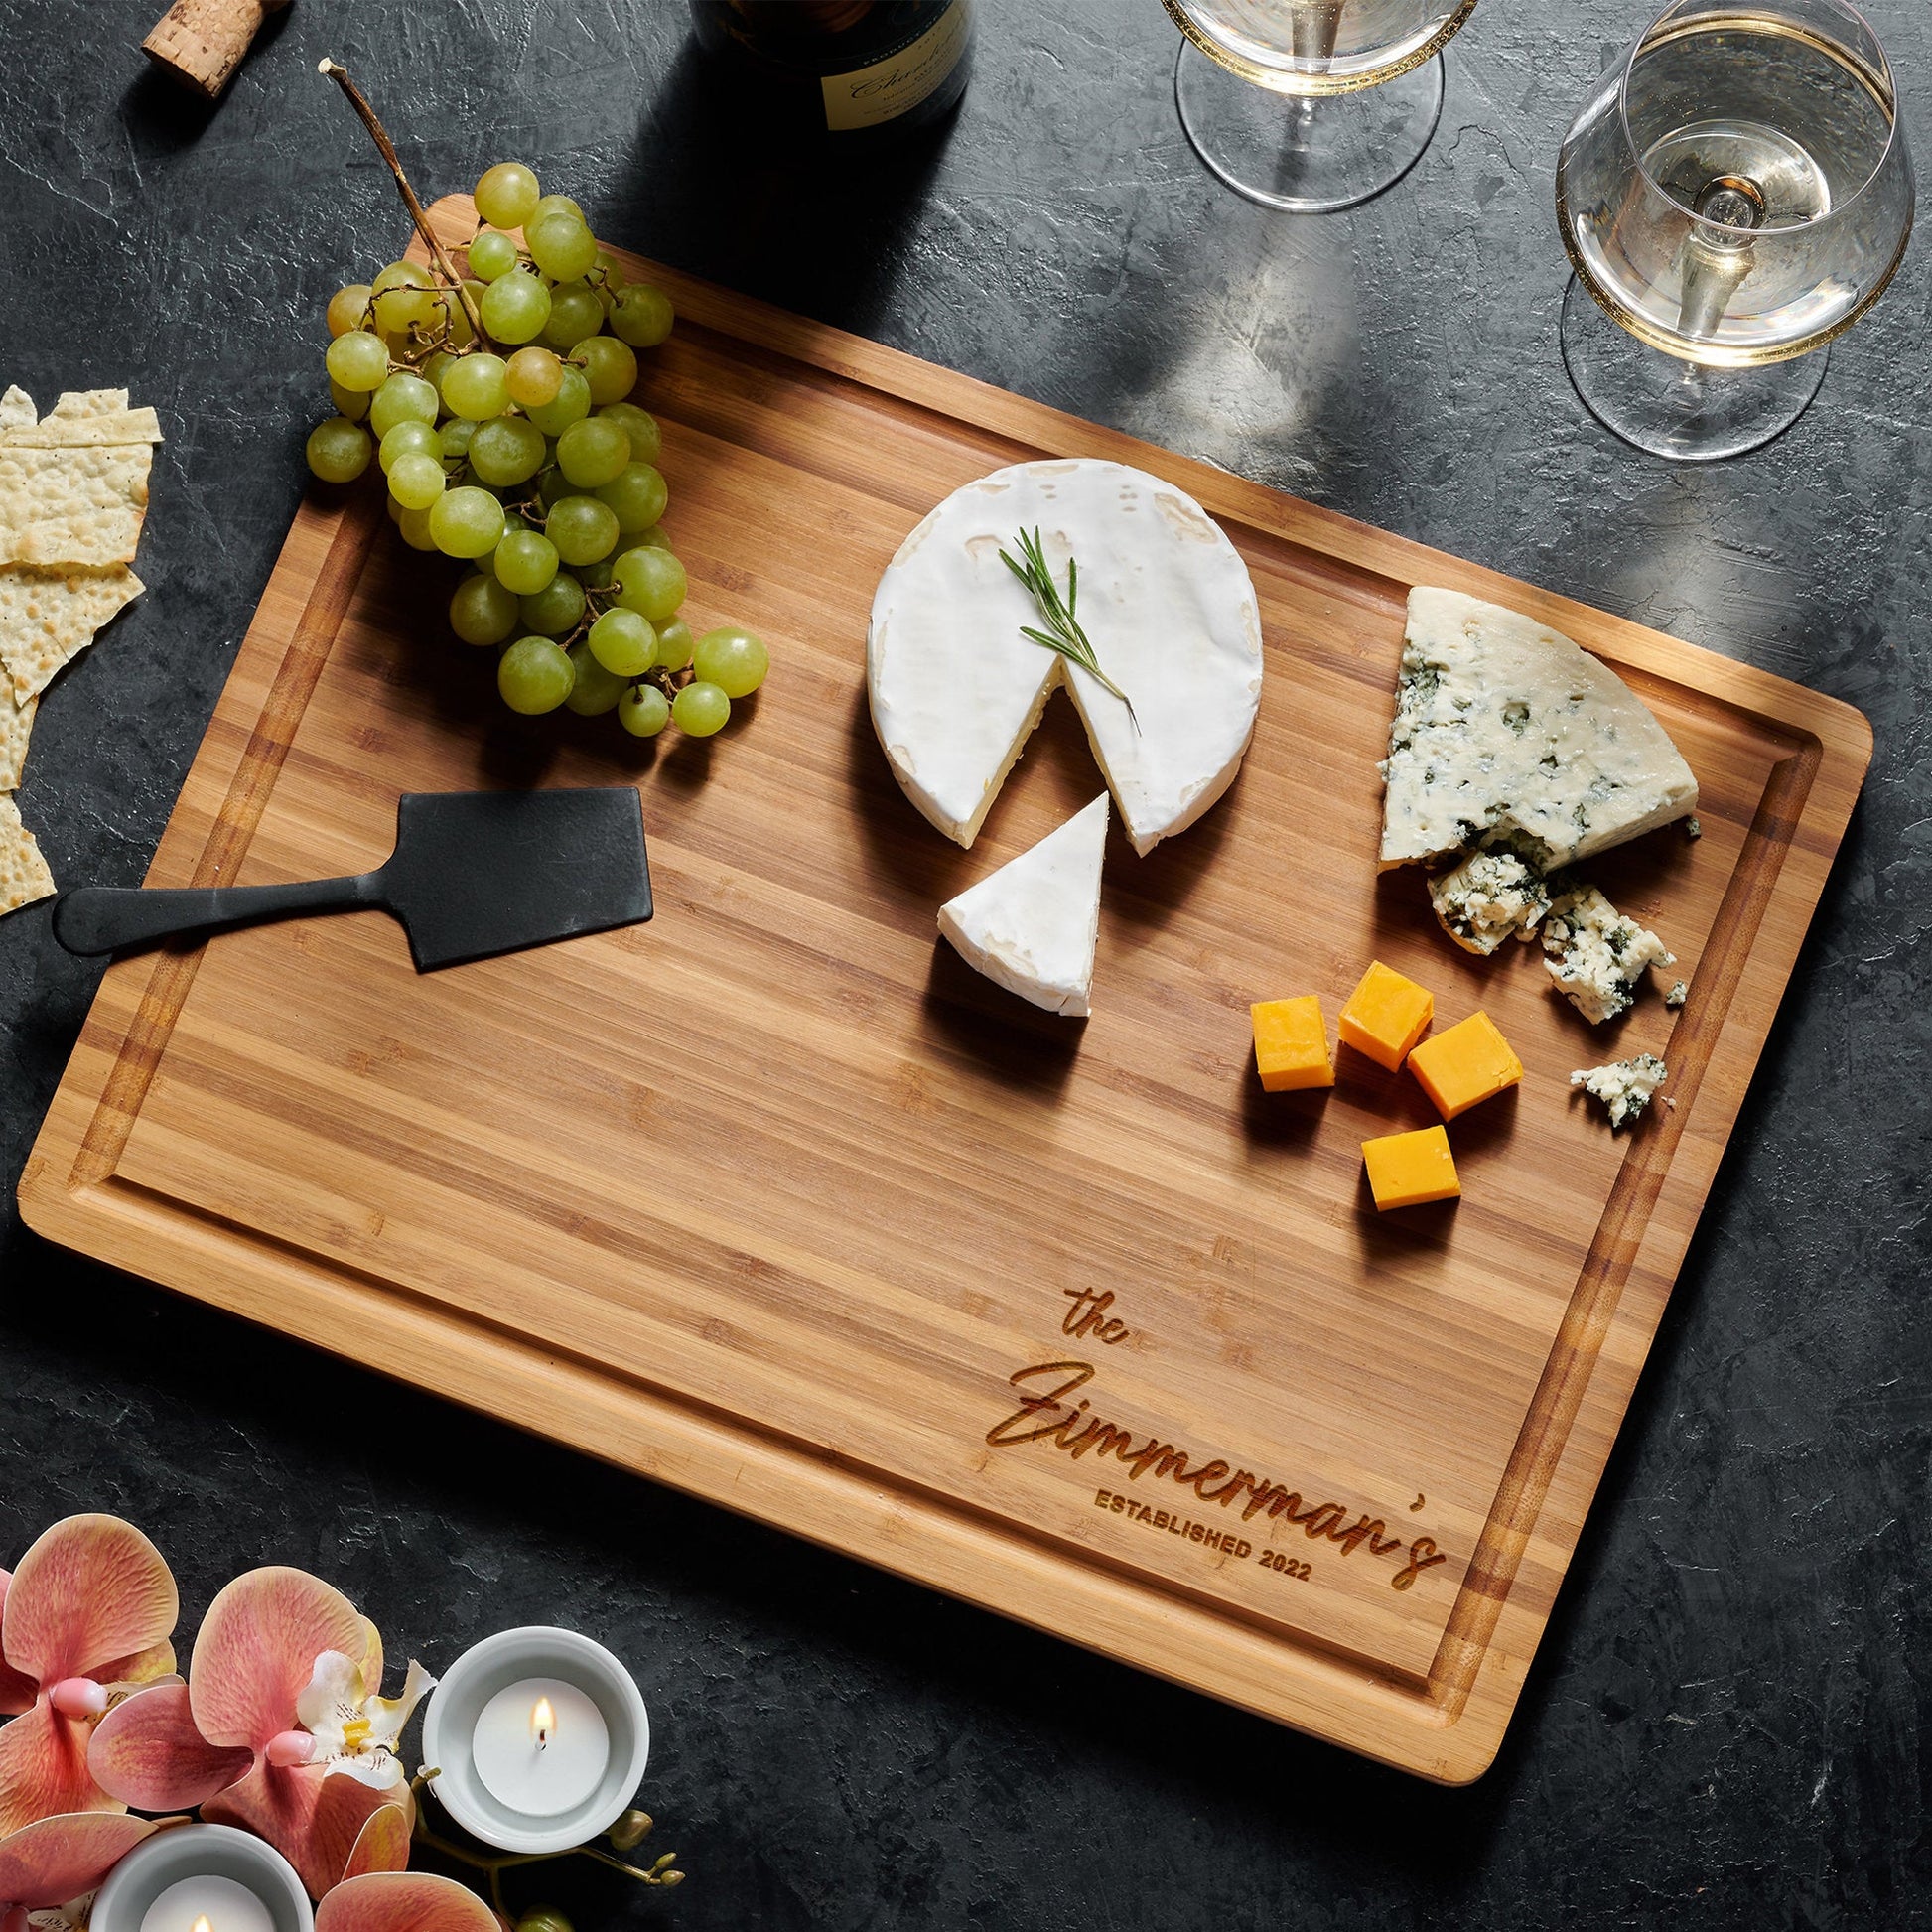 brie-and-blue-cheese-on-engraved-cutting-board-with-grapes.